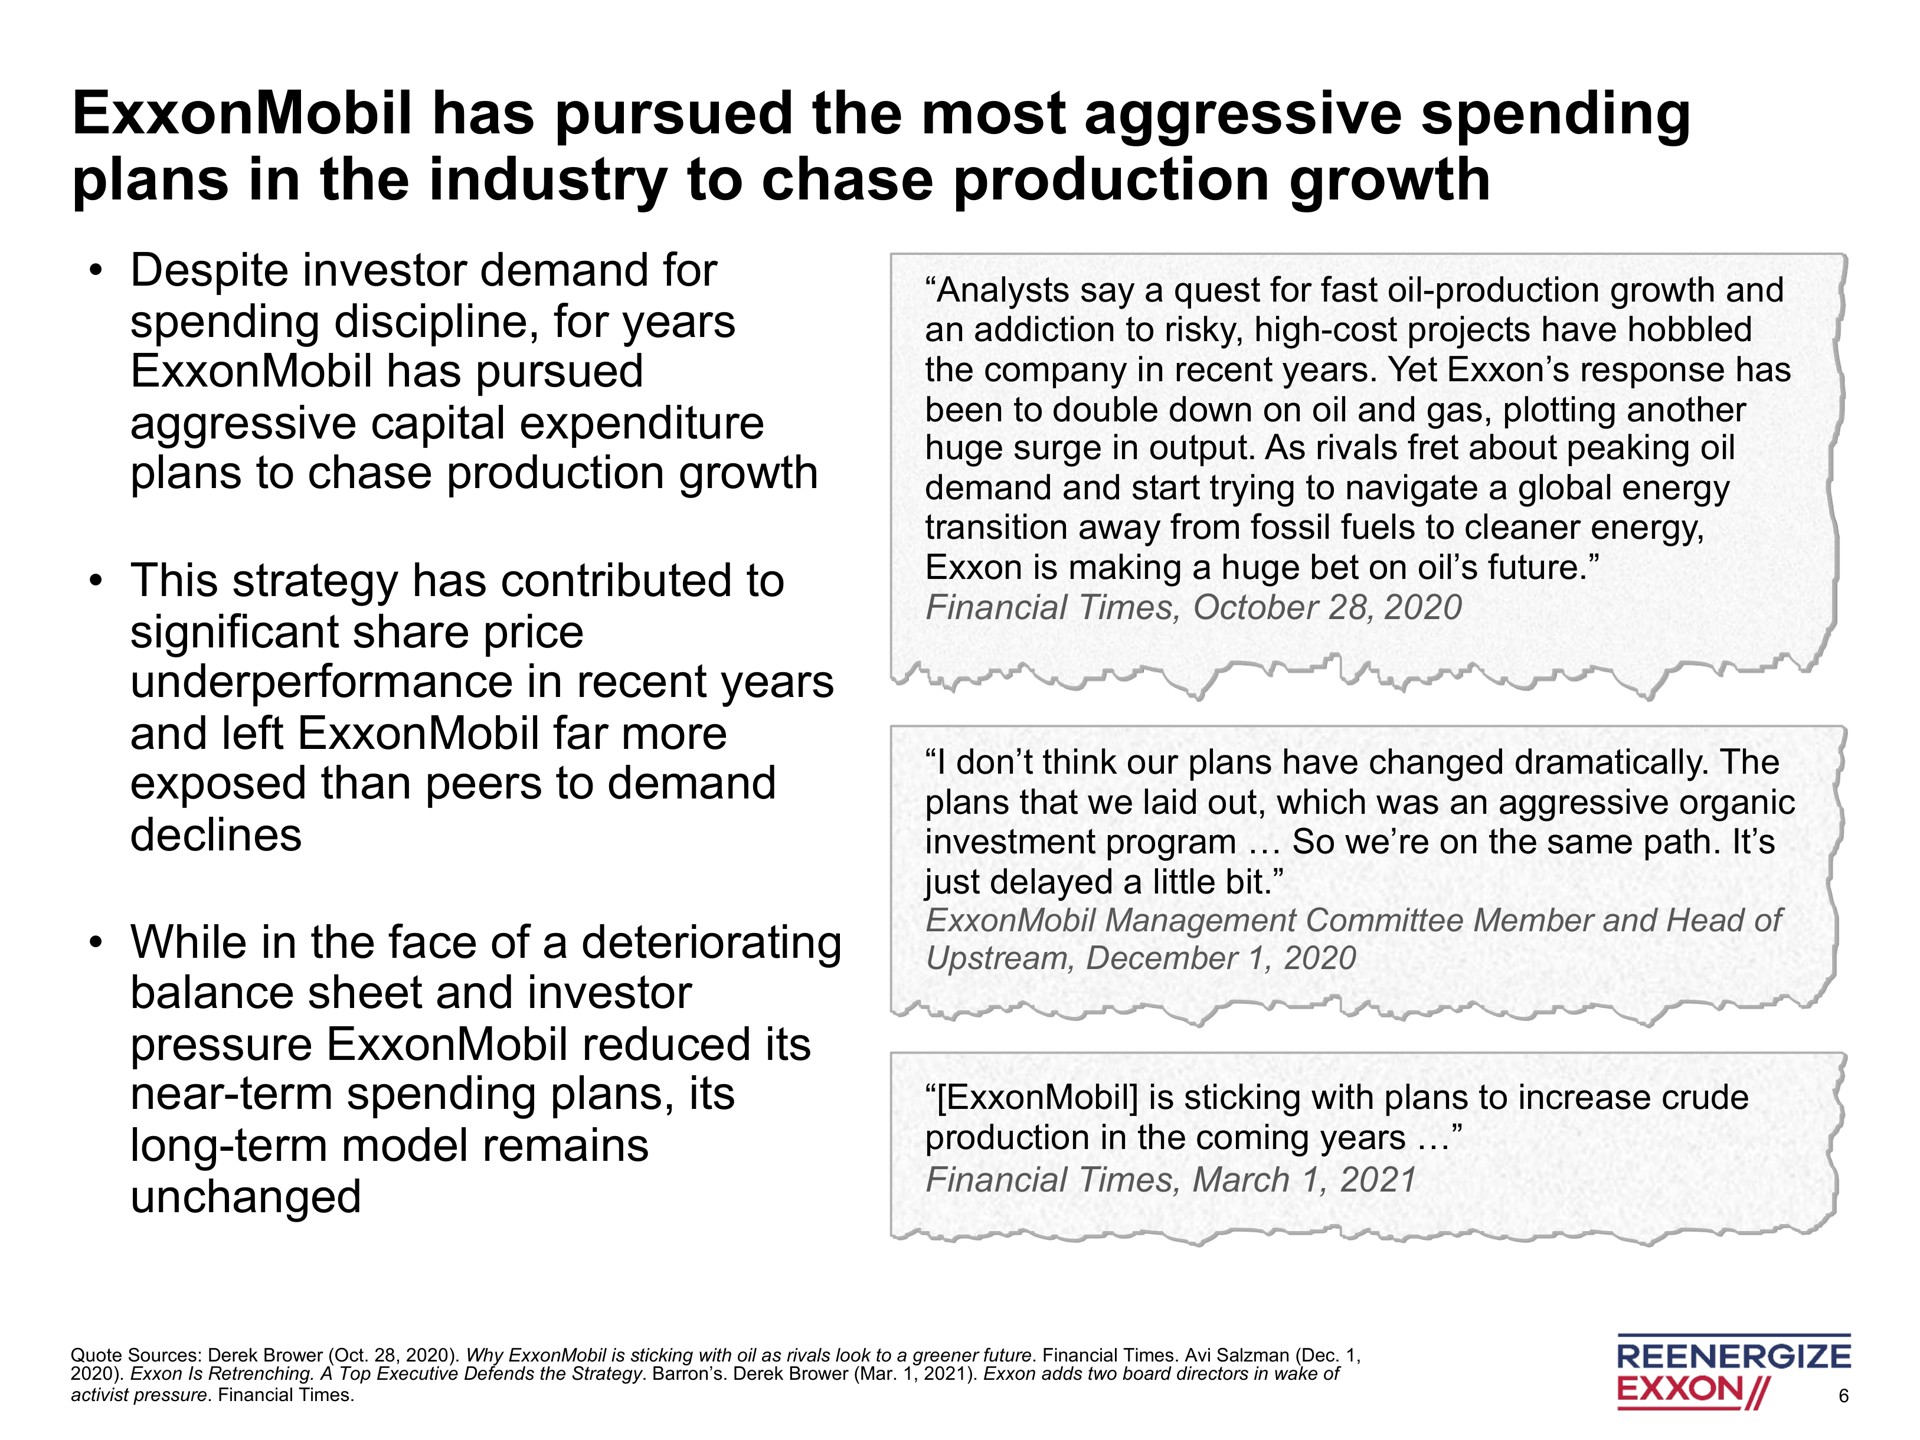 has pursued the most aggressive spending plans in the industry to chase production growth | Engine No. 1